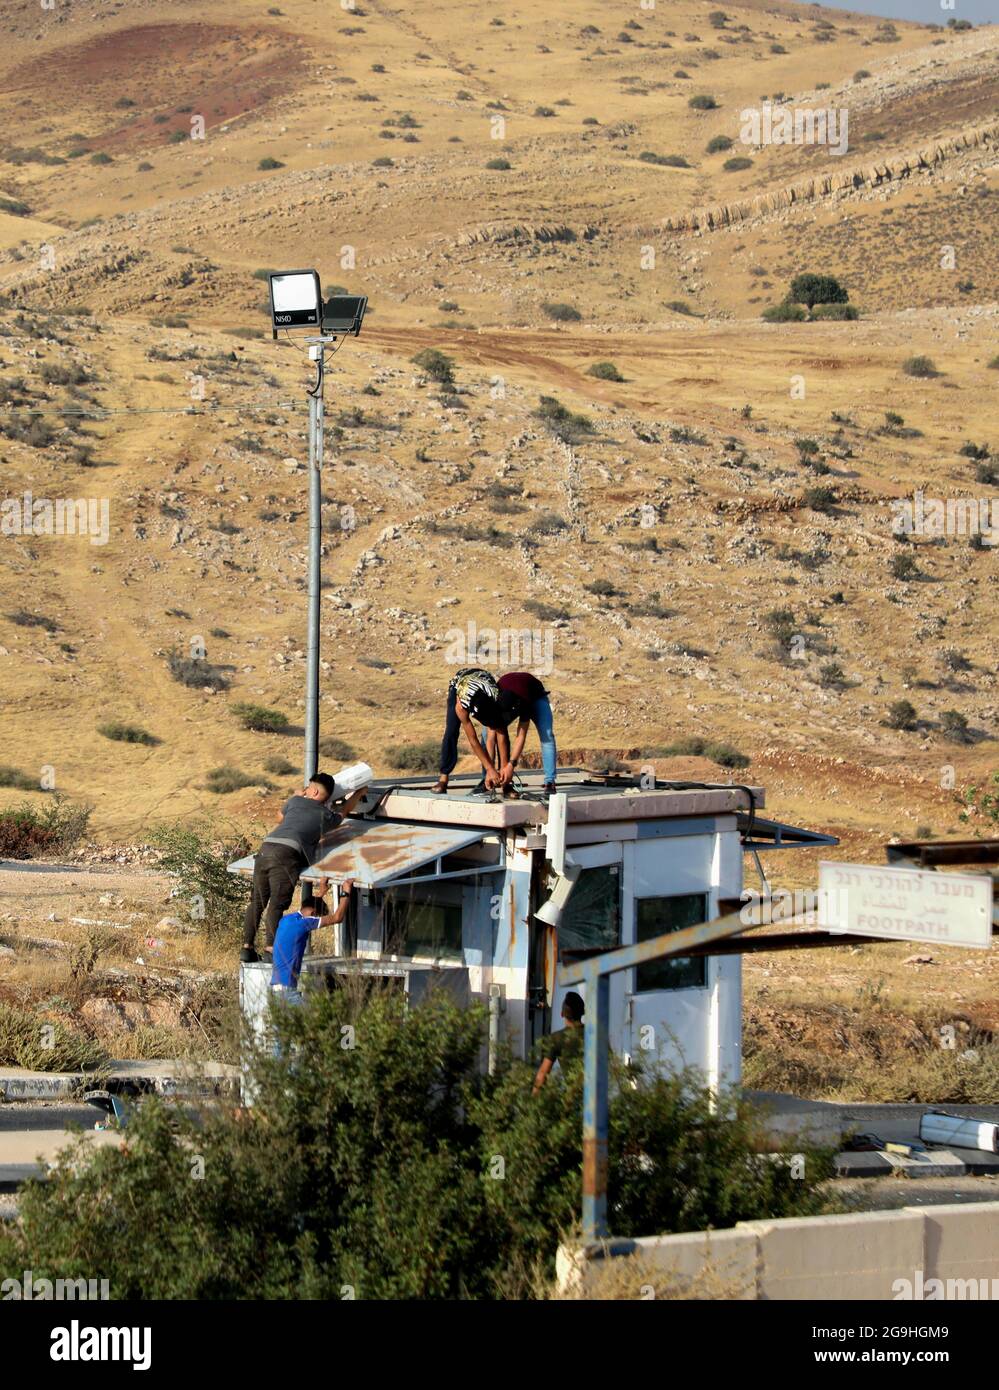 July 24, 2021, Tubas, West Bank, Palestine: Tubas, West Bank Palestine.  Palestine. 24 July 2021. Palestinian youths begin to dismantle an abandoned  Israeli army base near the Tayasir checkpoint on the east